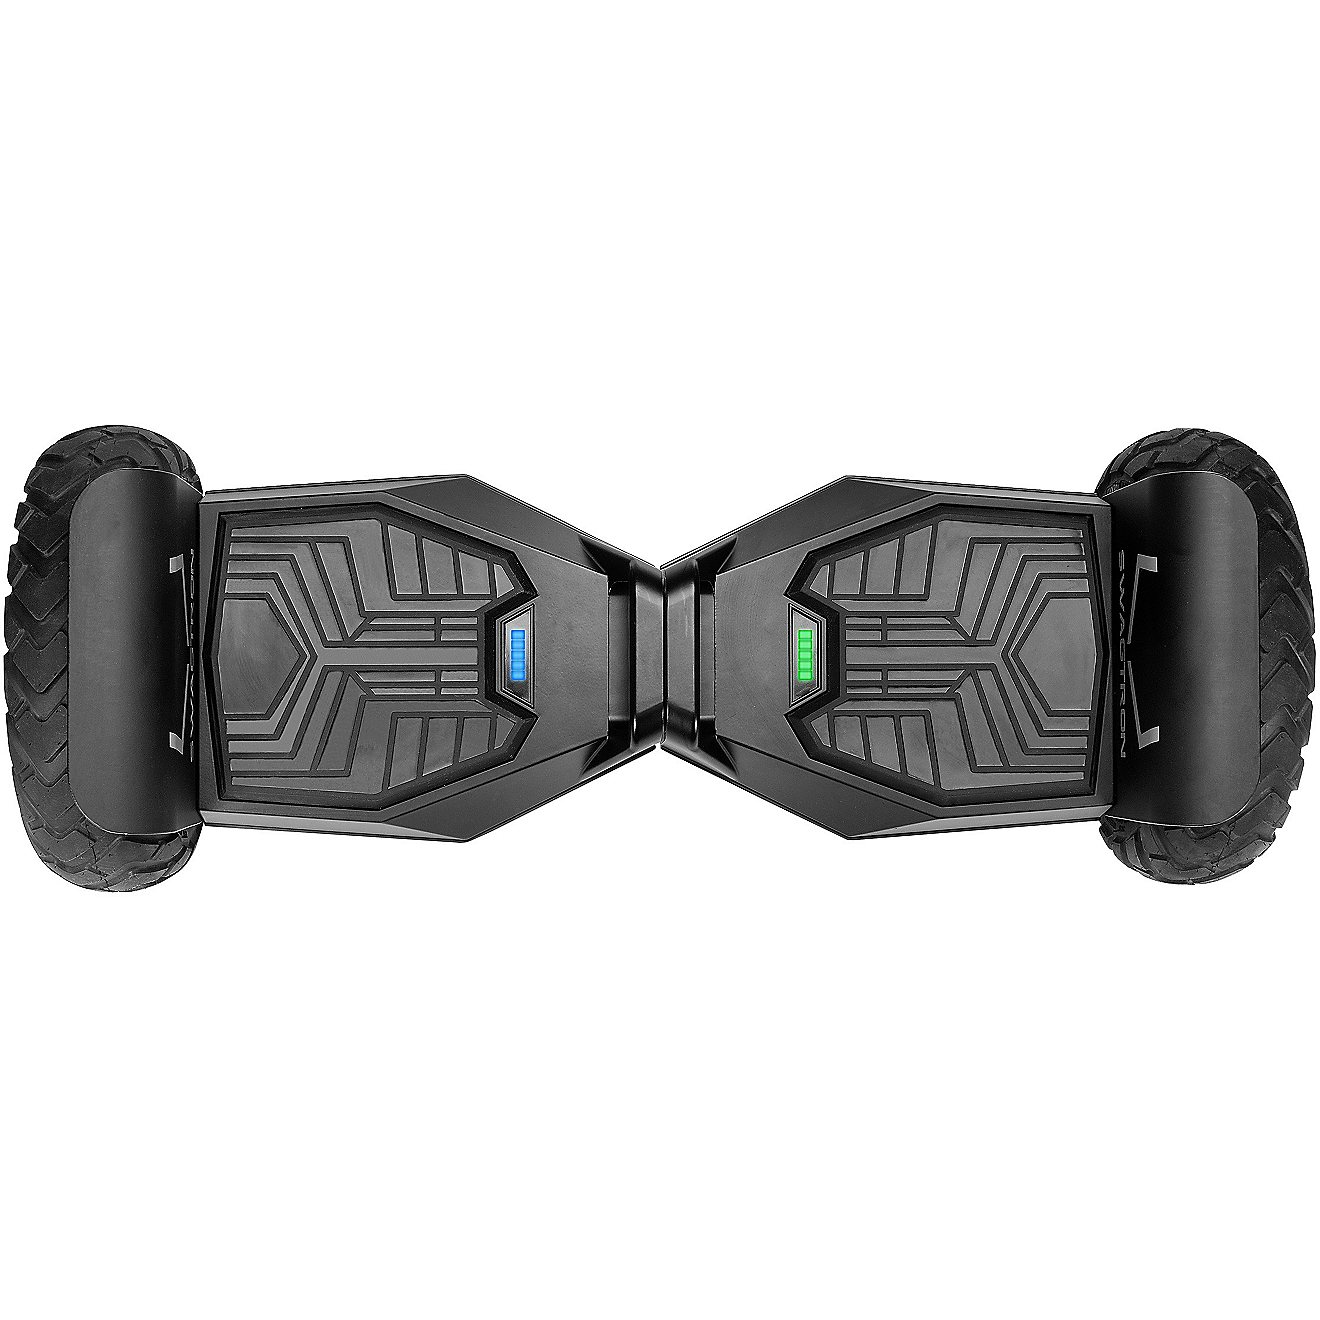 Swagtron Swagboard T6 Off-Road Hoverboard                                                                                        - view number 7